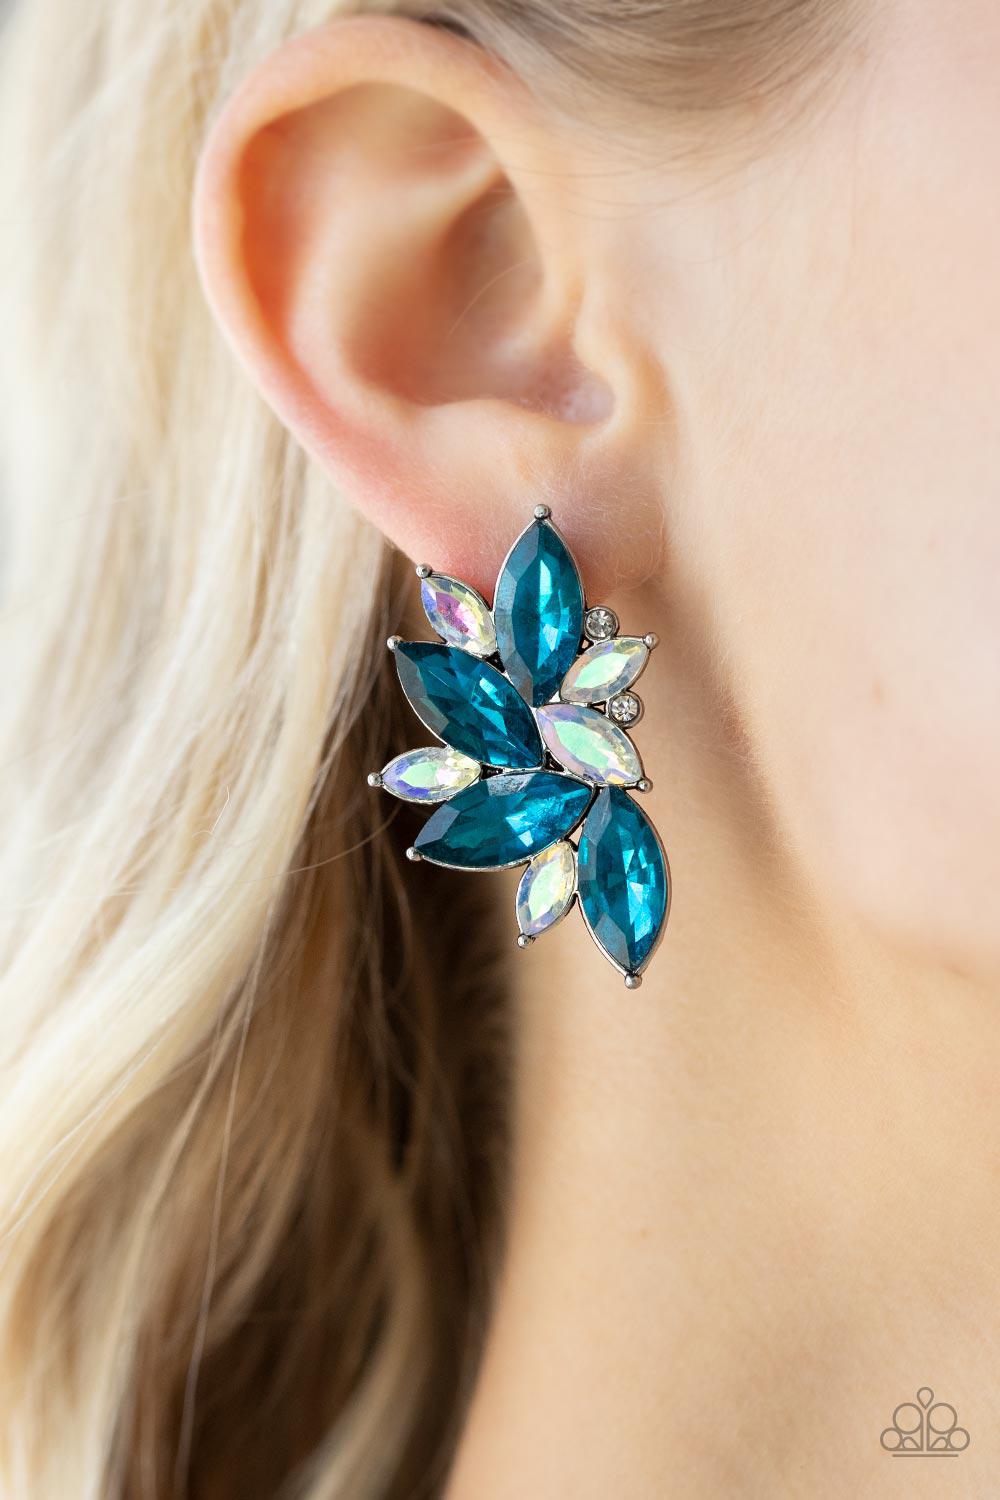 Instant Iridescence Blue Rhinestone Post Earrings - Paparazzi Accessories-on model - CarasShop.com - $5 Jewelry by Cara Jewels